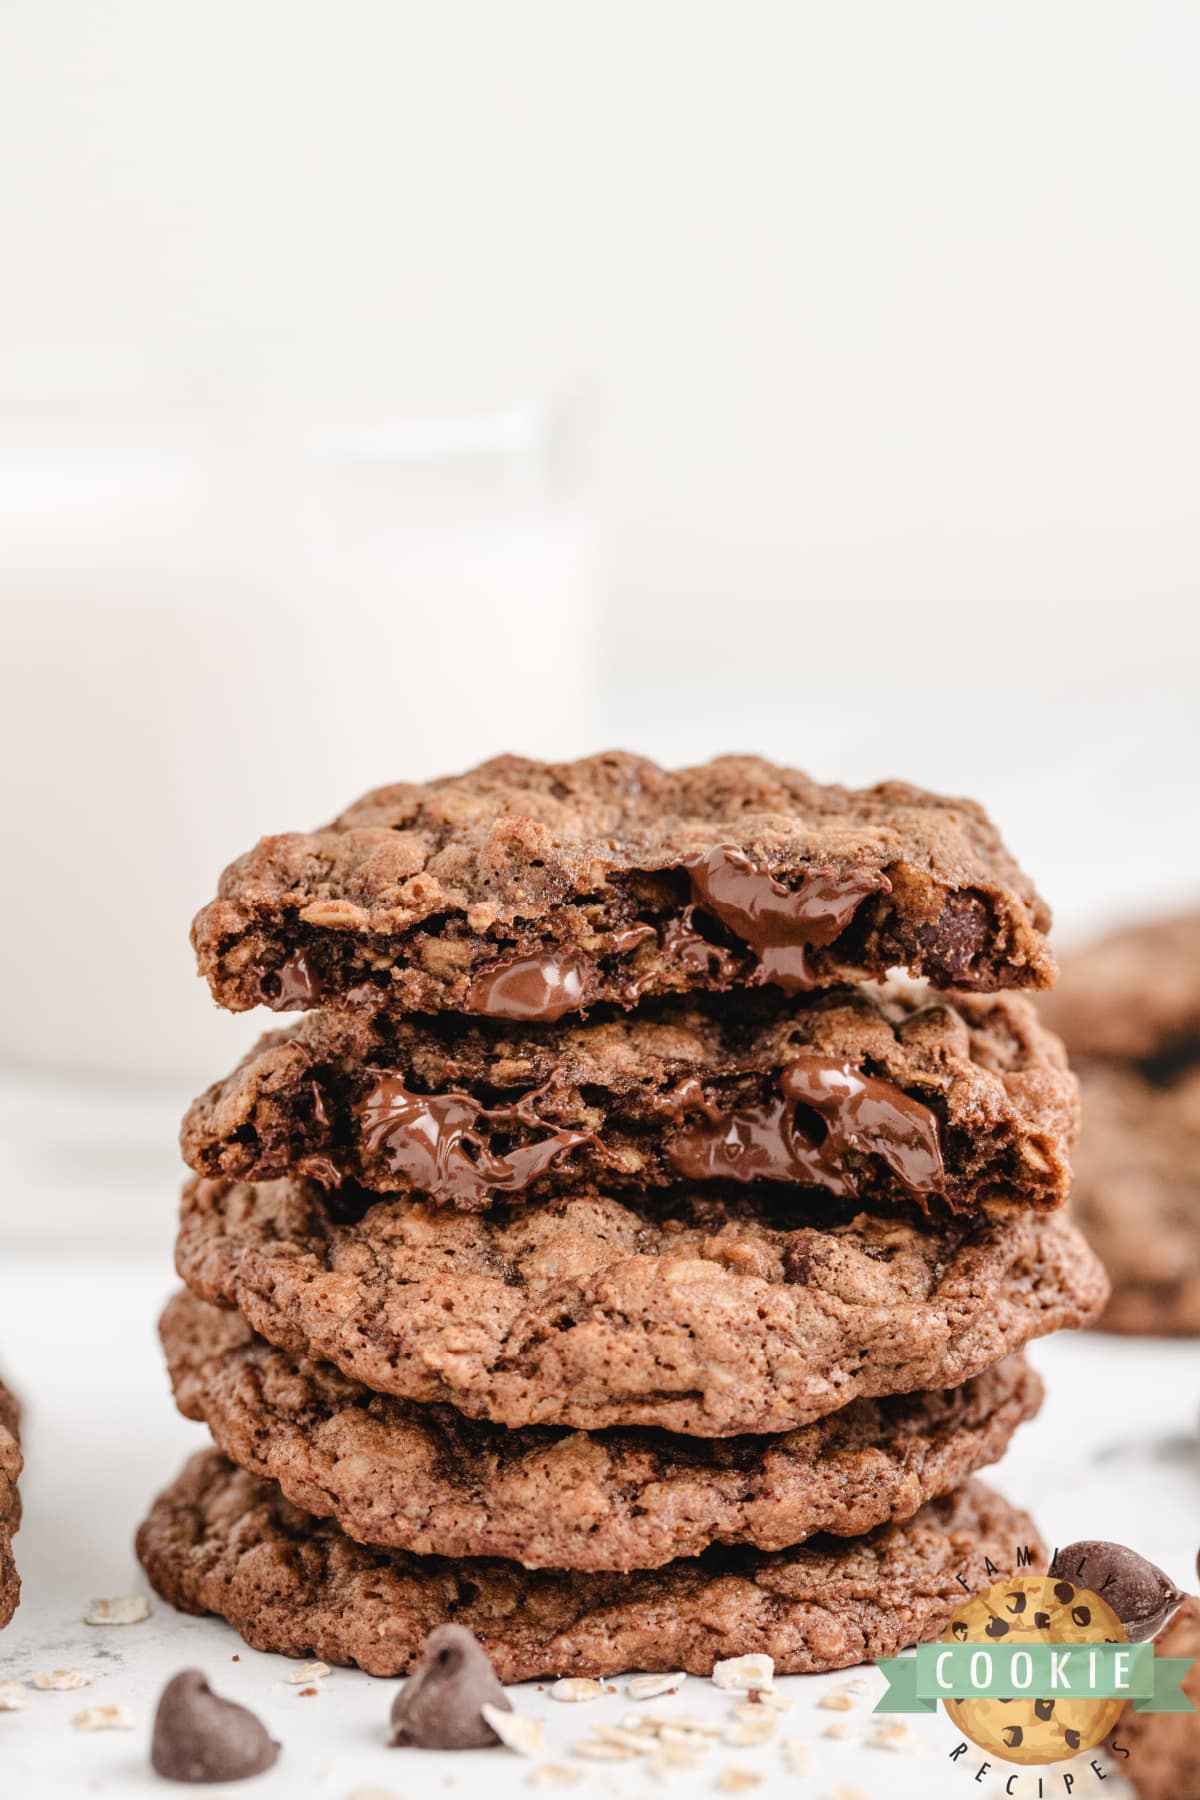 Double Chocolate Oatmeal Cookies are soft, chewy, and packed with chocolate! Chocolate cookie recipe packed with oats and chocolate chips.